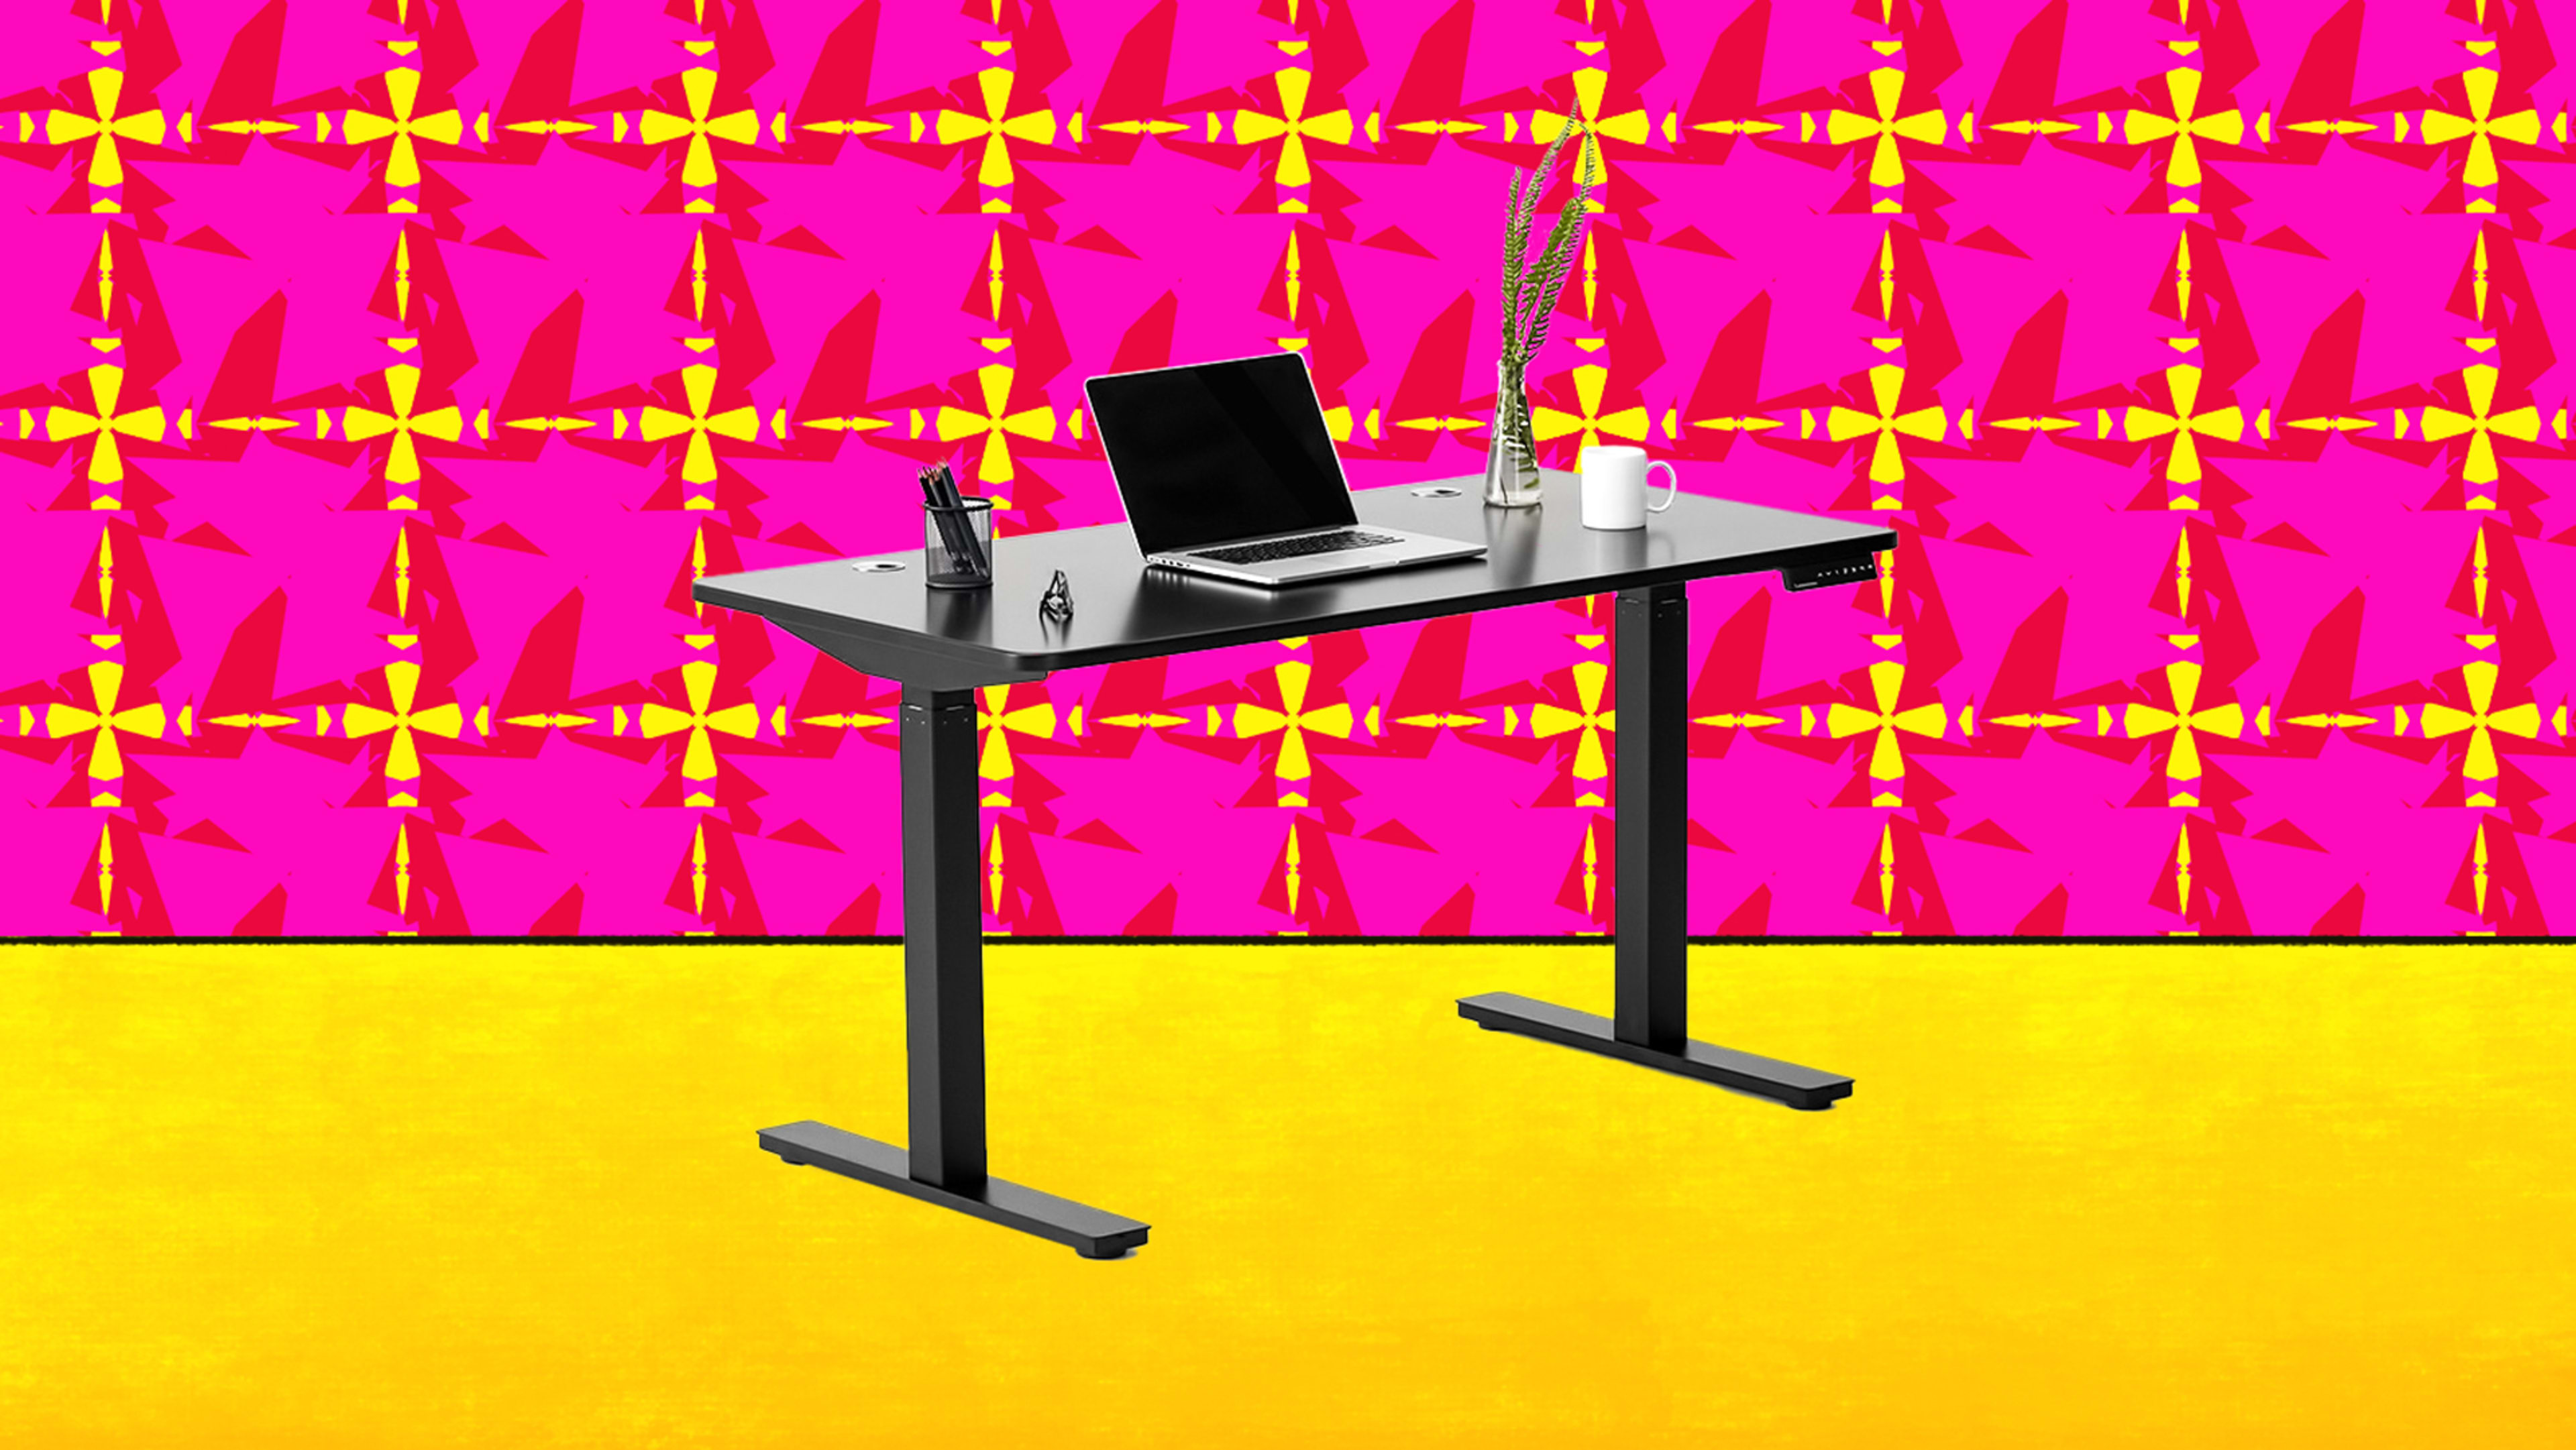 These 4 beautifully designed desks will instantly upgrade your home office setup